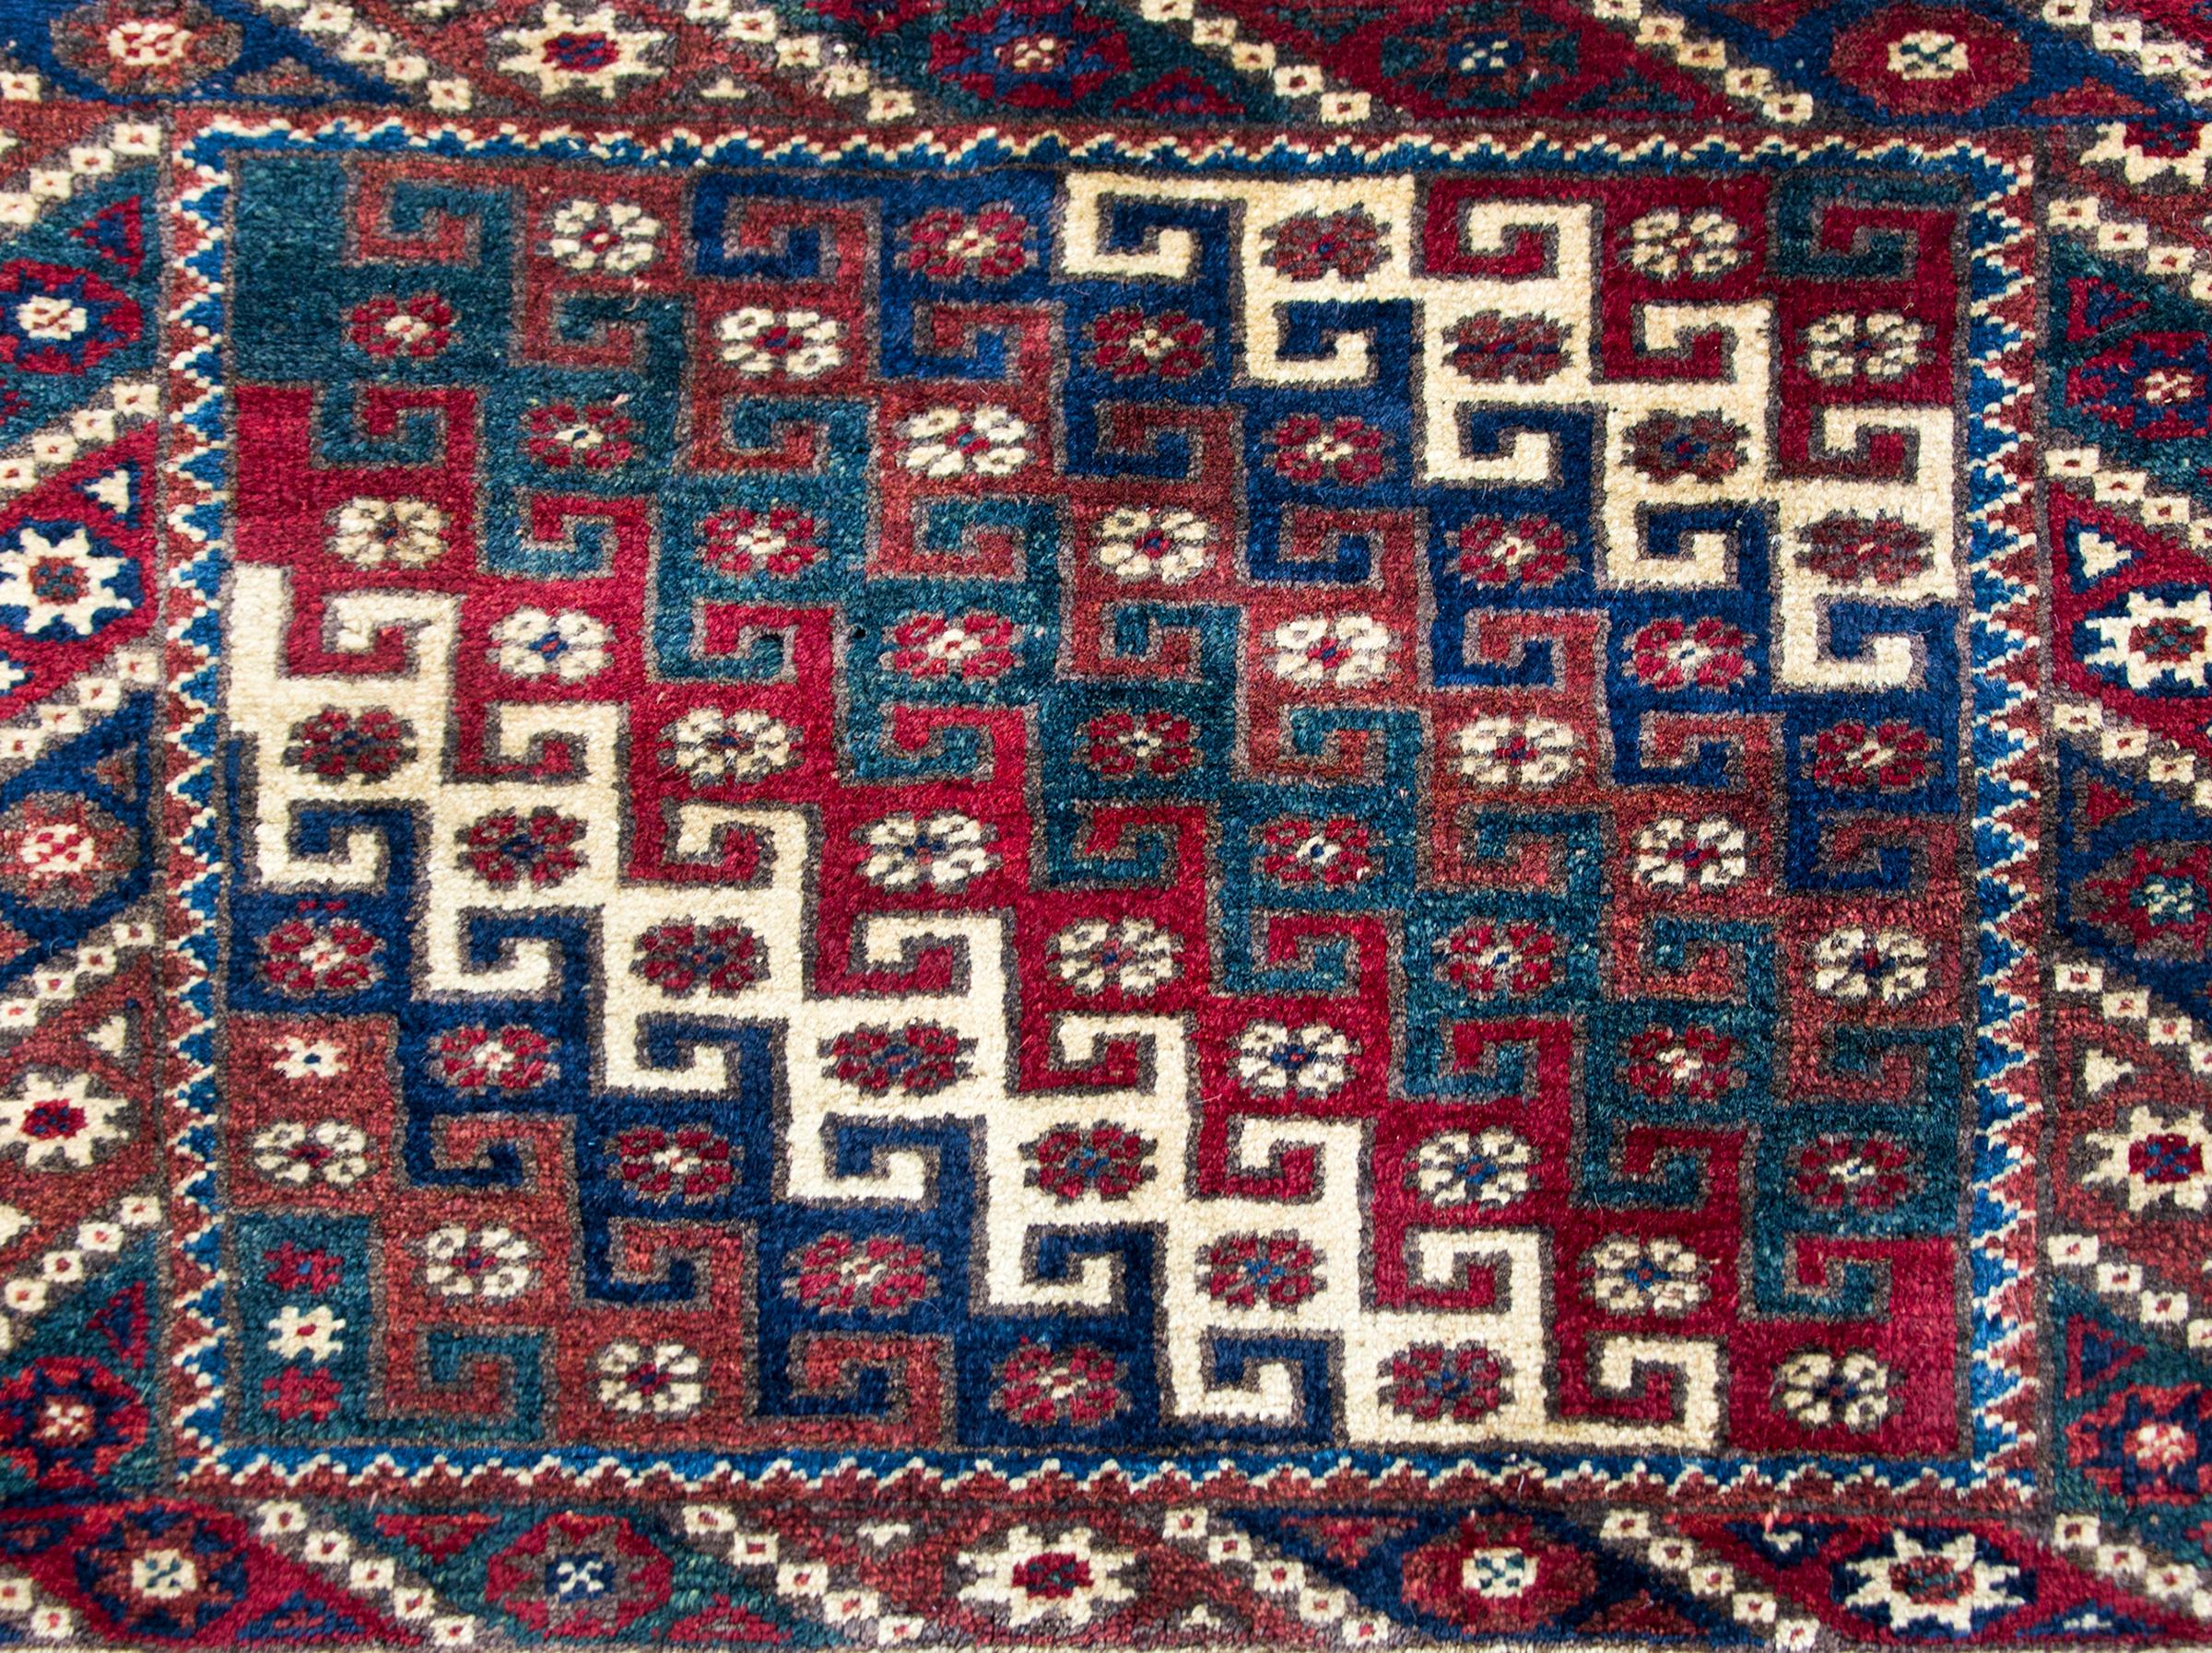 A beautiful vintage Turkish Konya rug with an all-over diagonal pattern with interlocking geometric stripes and petite flowers, surrounded by a border with more petite flowers and geometric patterned stripes, and all woven in jewel tones including